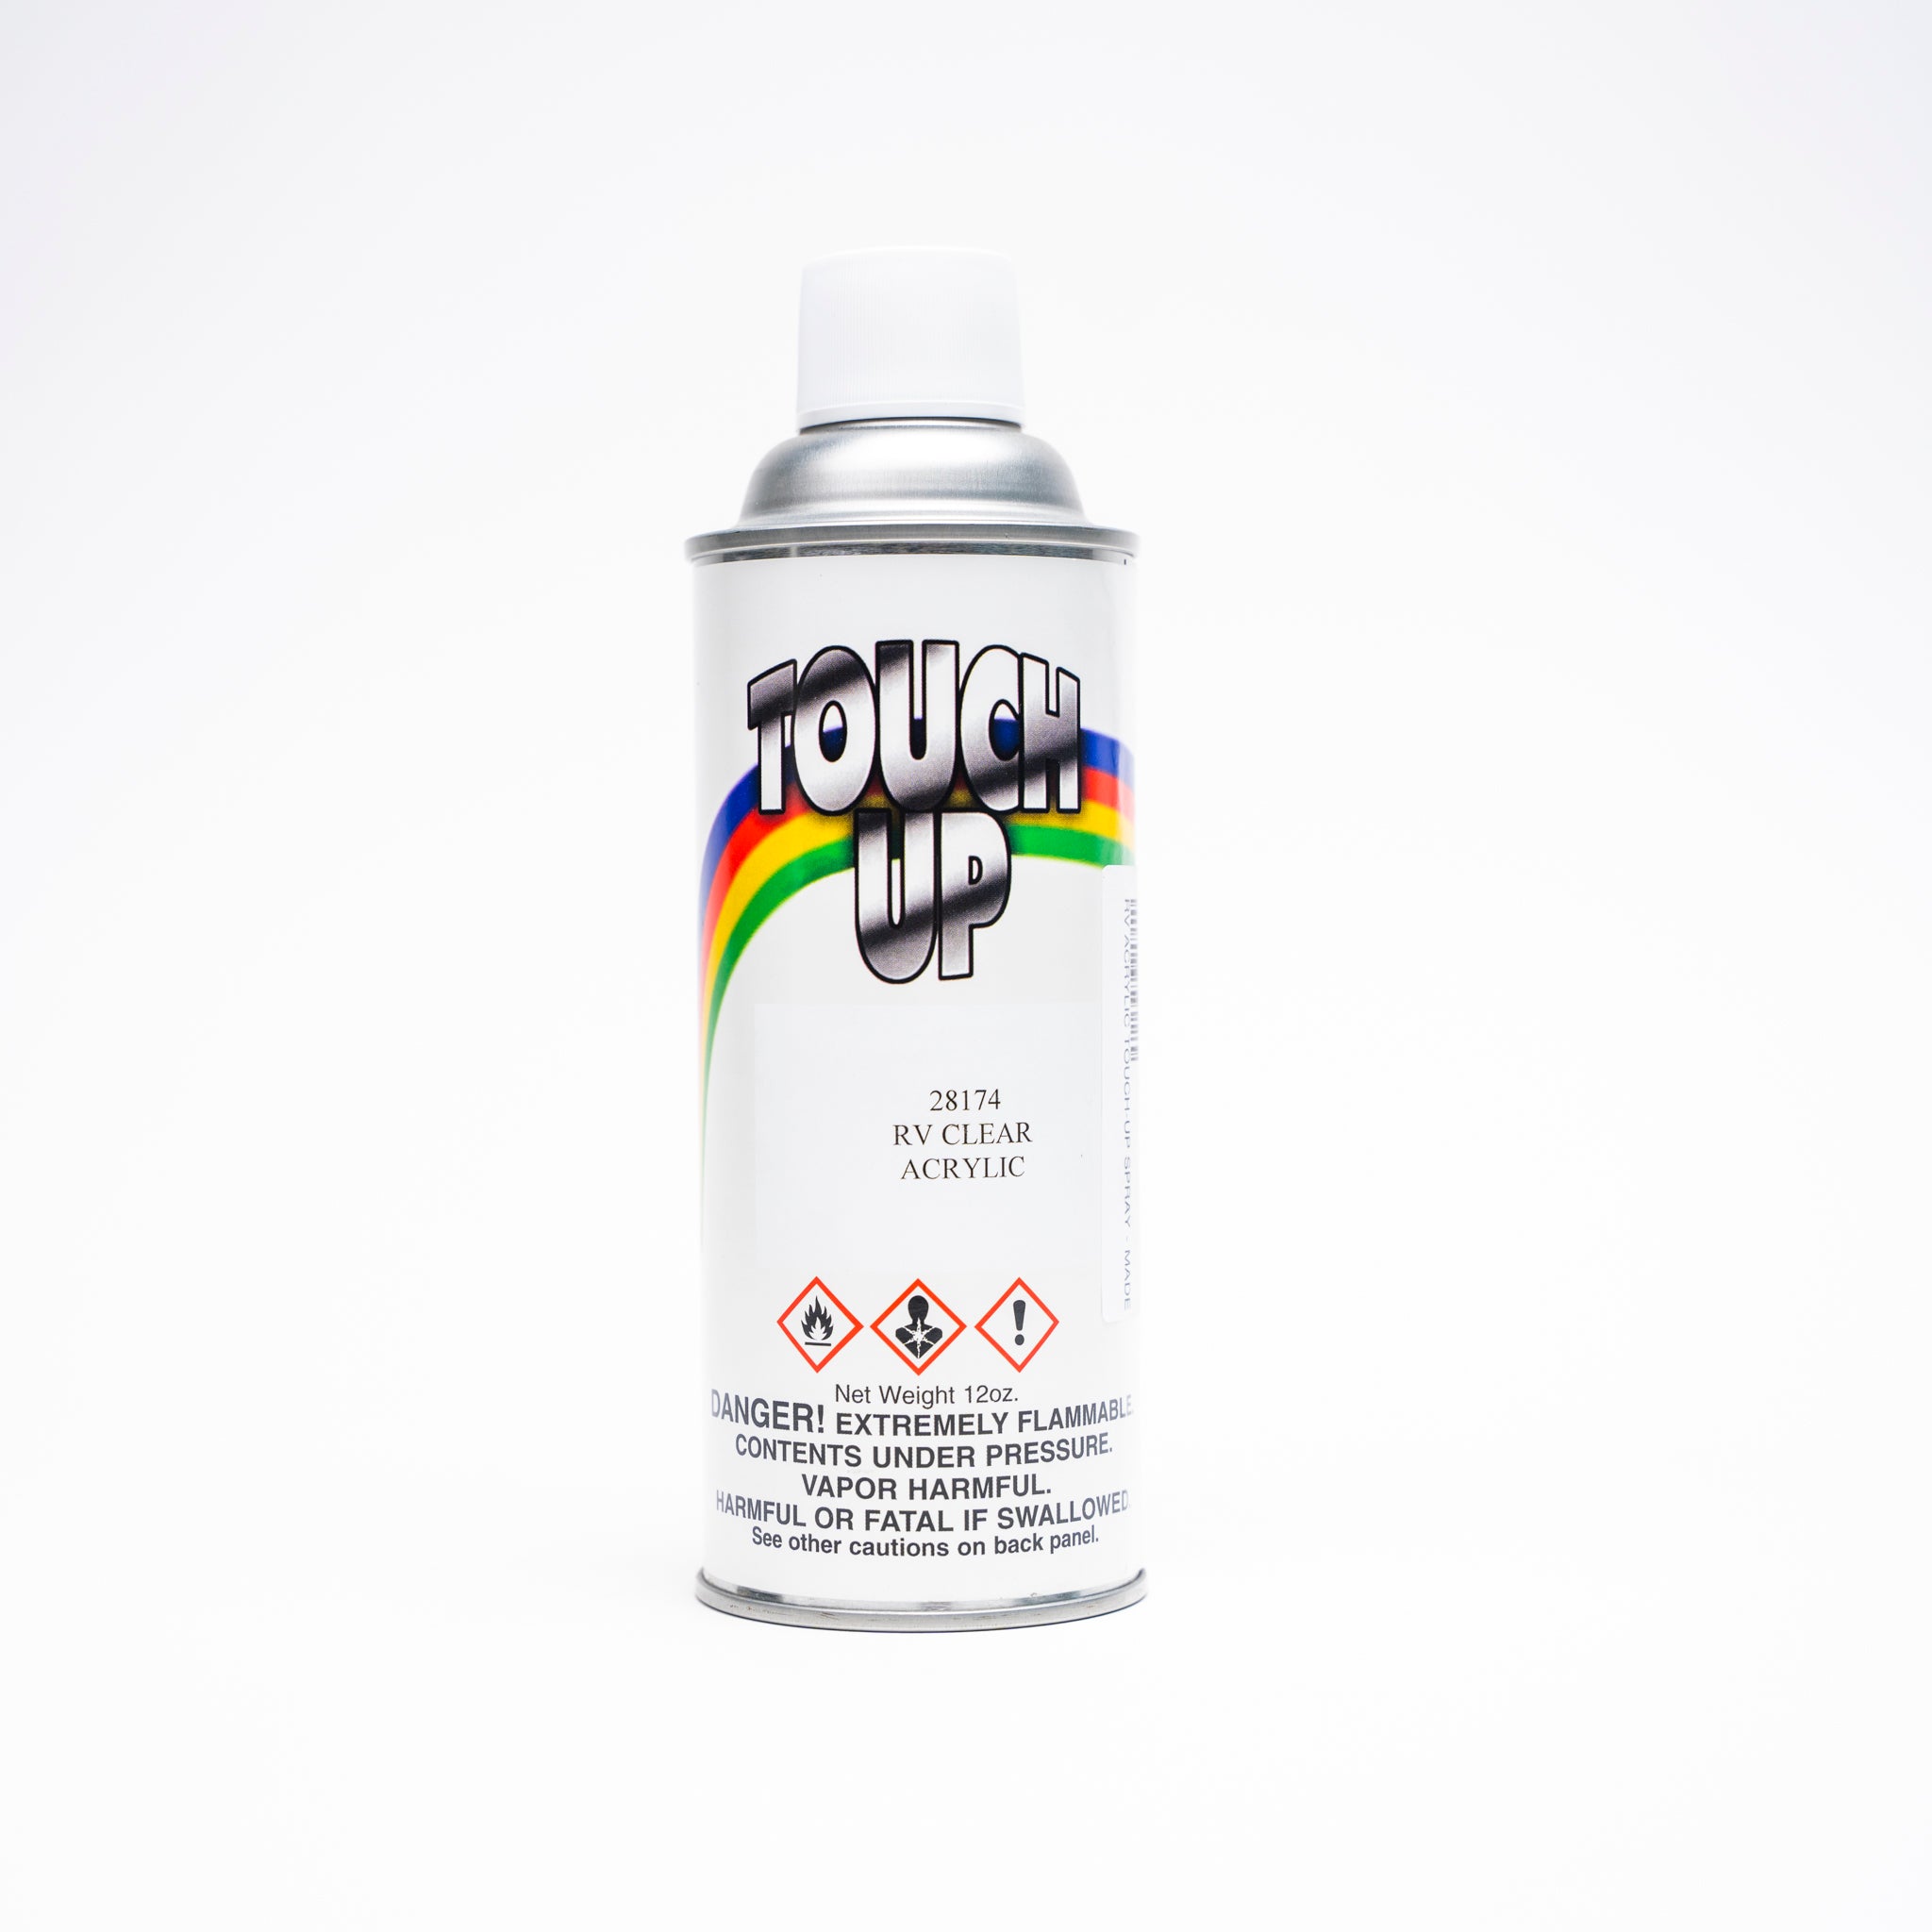 RV ACRYLIC TOUCH-UP SPRAY - MADE FROM 360290 – We Are Airstream